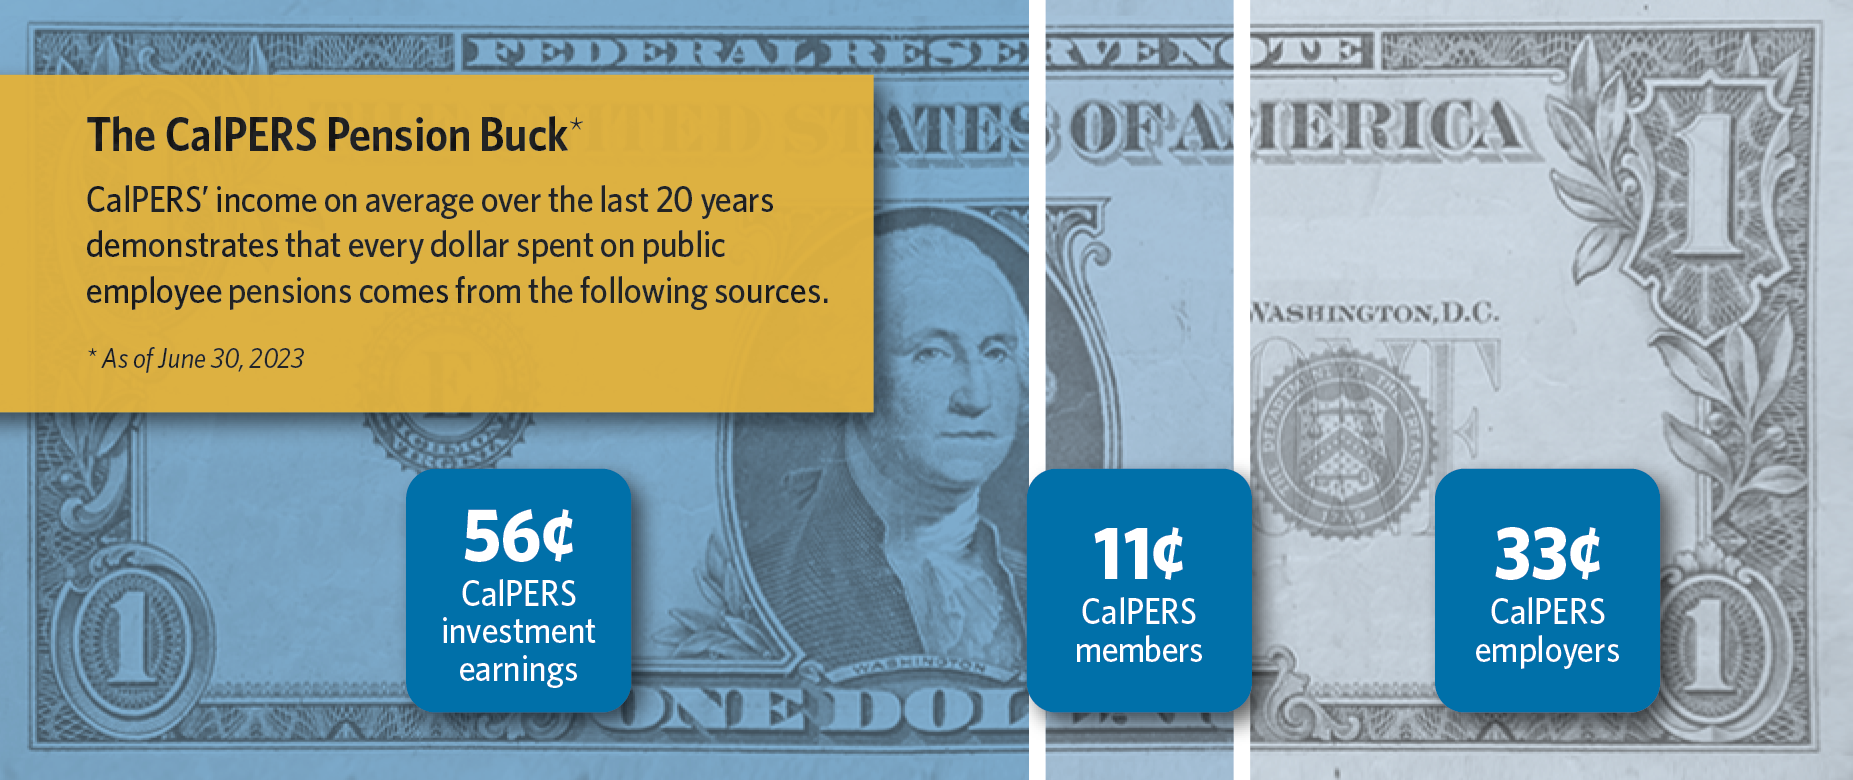 The CalPERS Pension Buck: 56 cents comes from CalPERS investment earnings, 33 cents comes from CalPERS employers, and 11 cents comes from CalPERS members